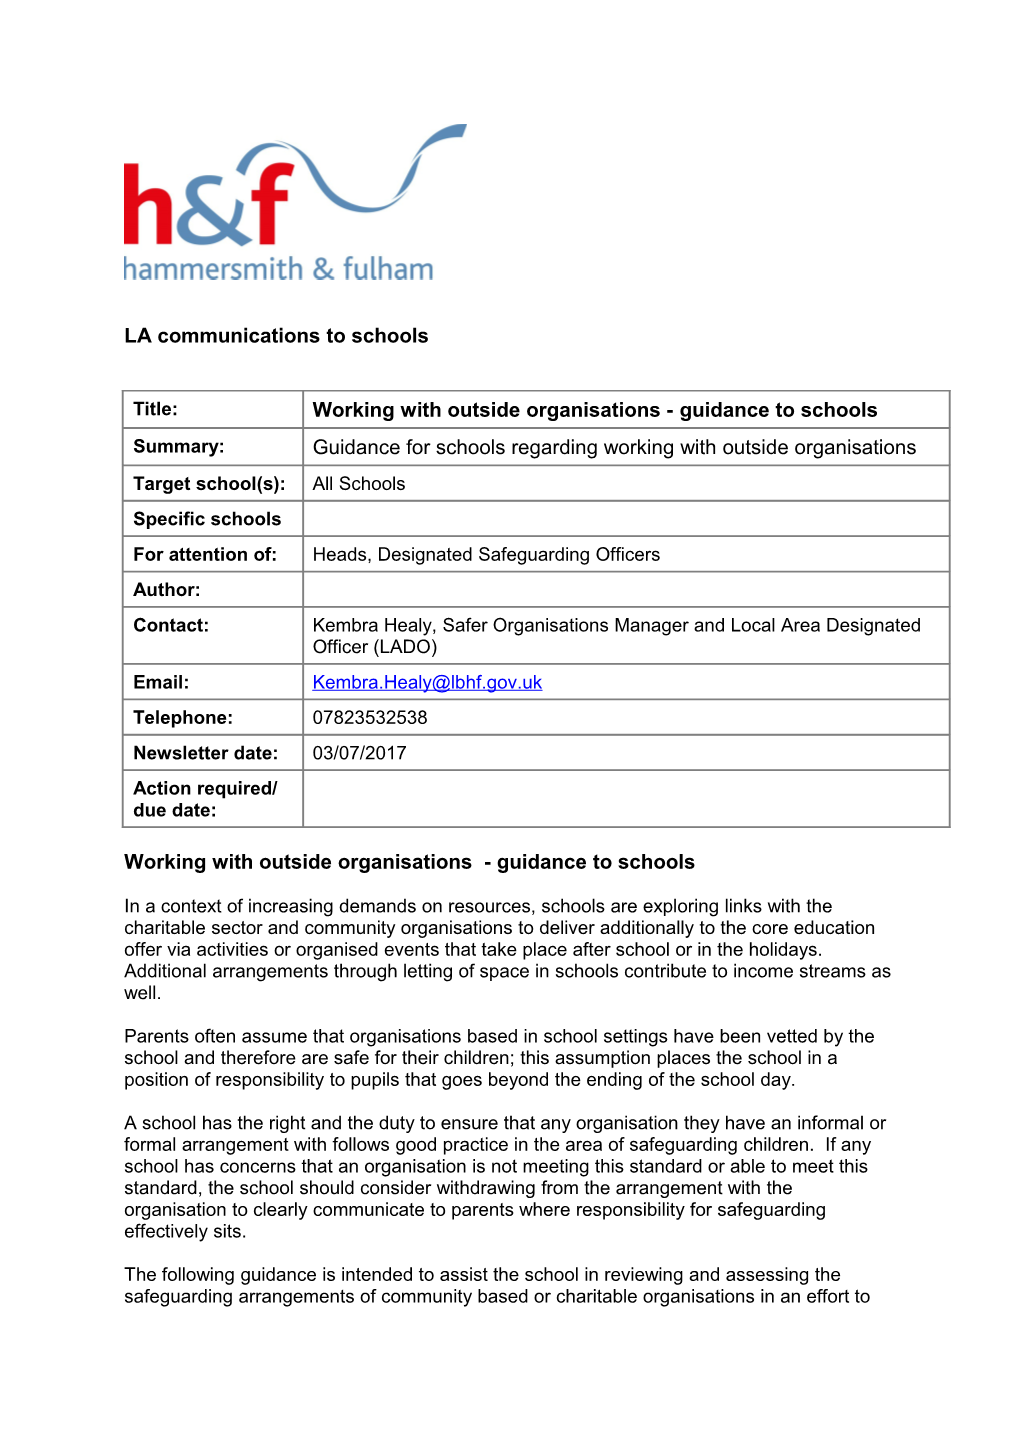 Working with Outside Organisations - Guidance to Schools